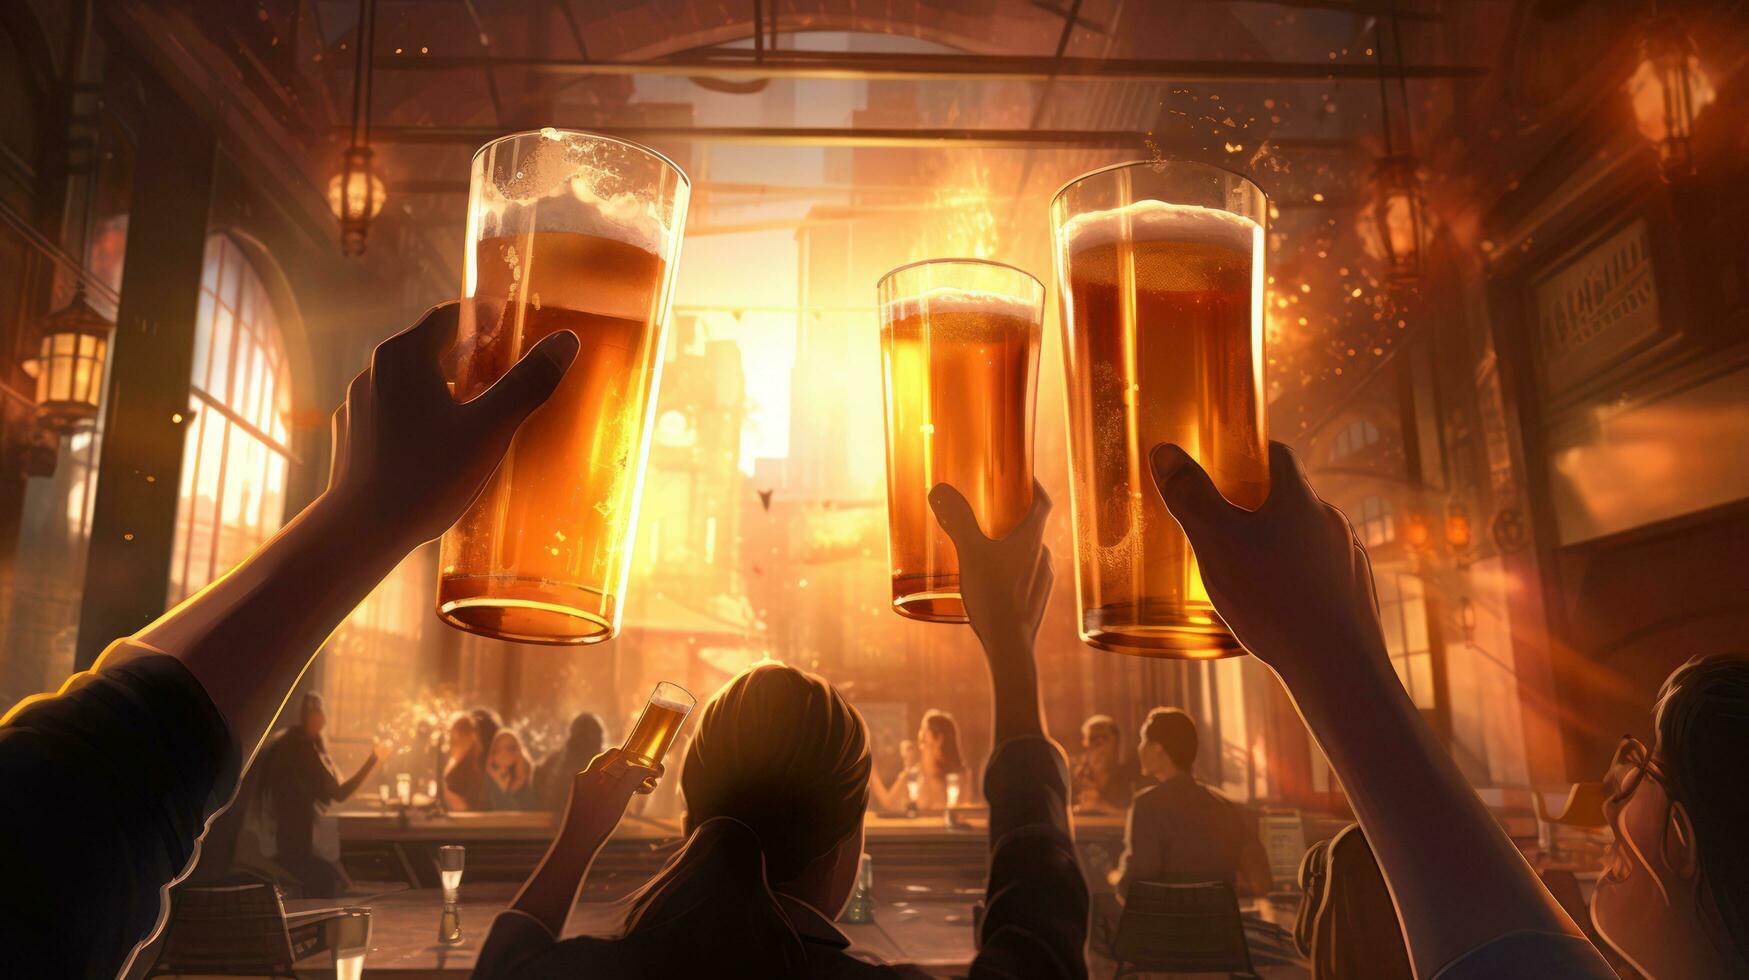 beer glasses of people toasting at the bar photo